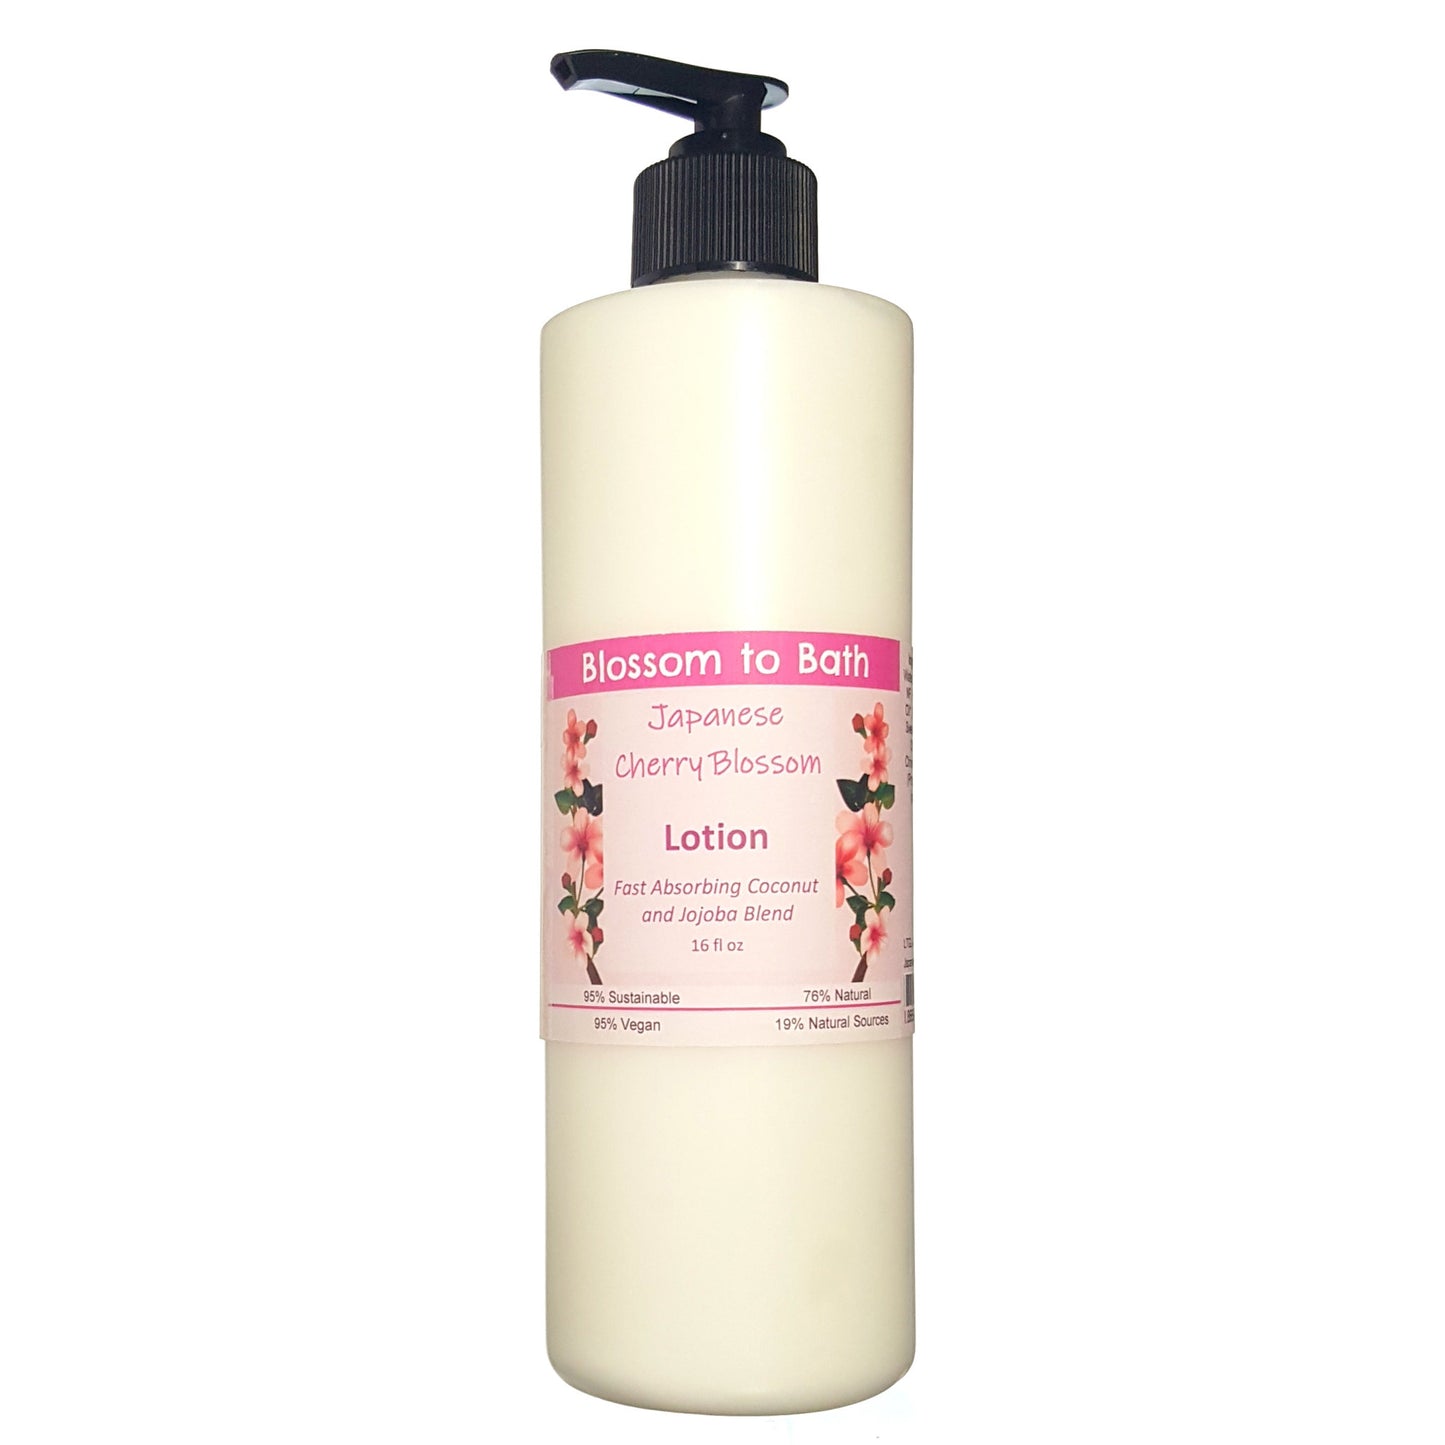 Buy Blossom to Bath Japanese Cherry Blossom Lotion from Flowersong Soap Studio.  Daily moisture luxury that soaks in quickly made with organic oils and butters that soften and smooth the skin  A sophisticated and rich cherry blossom fragrance that is oriental and sensual.